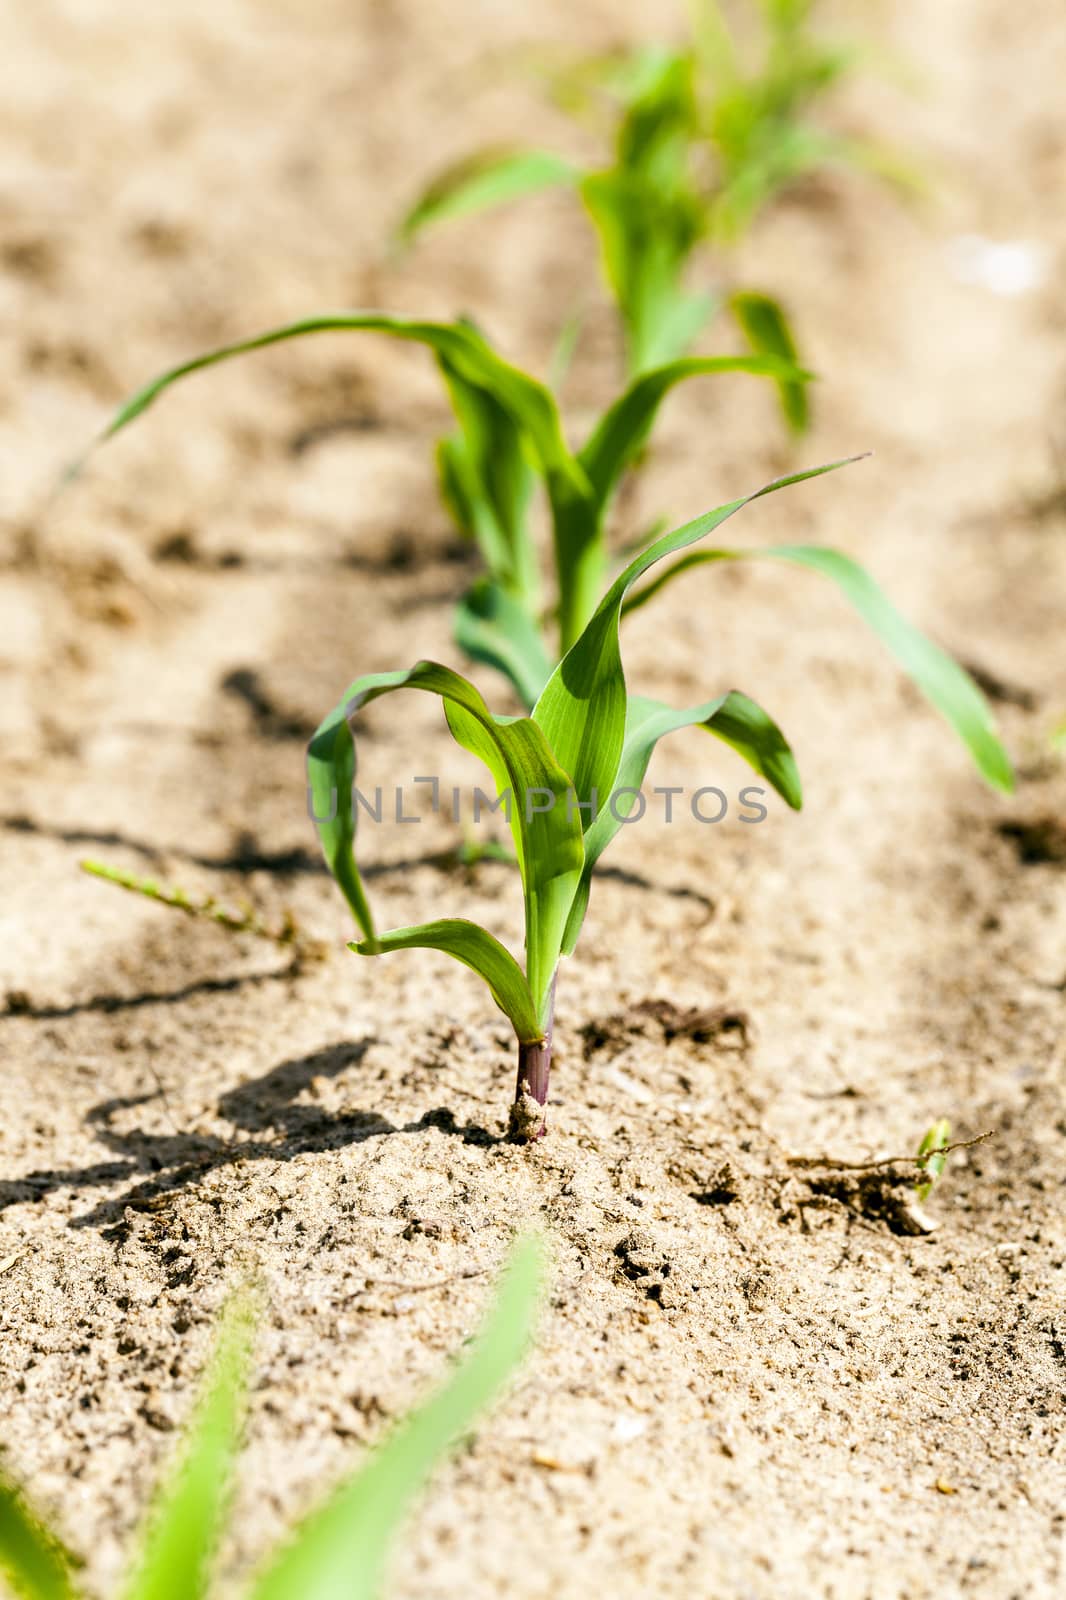  small new sprout of corn photographed close up